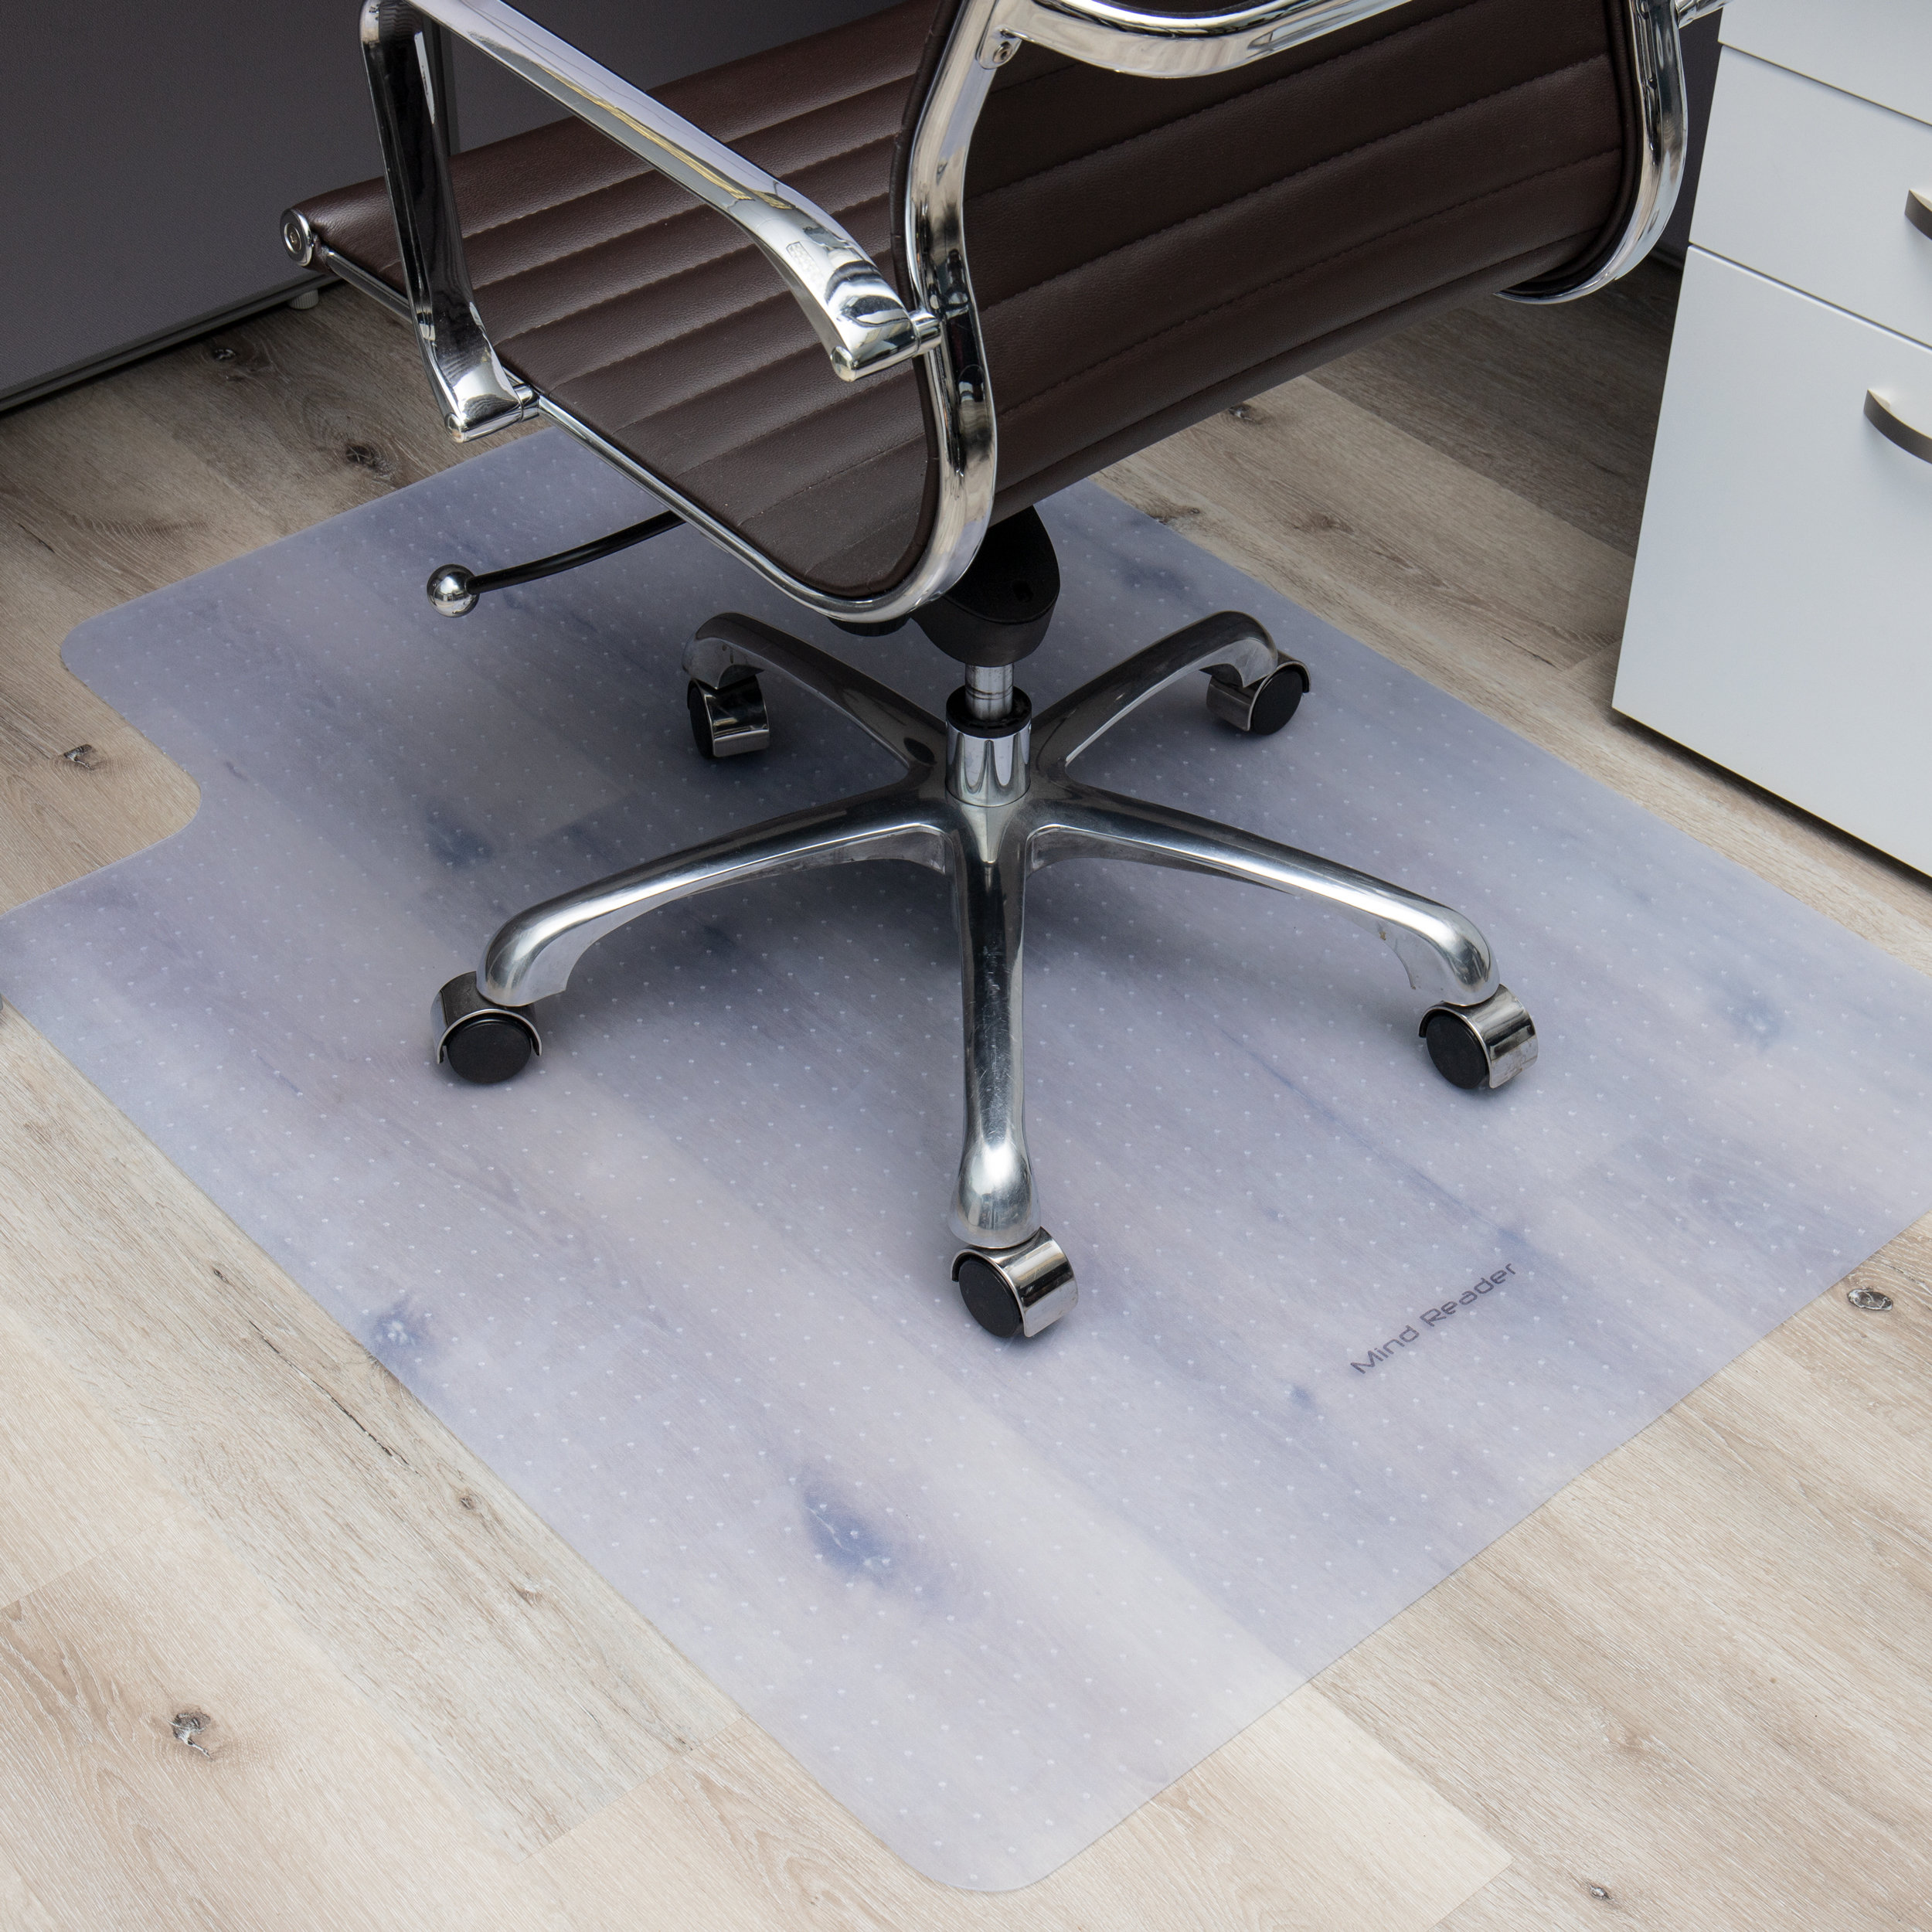 Standard Lip Water Resistant Chair Mat with Straight Edge for Firm Surfaces